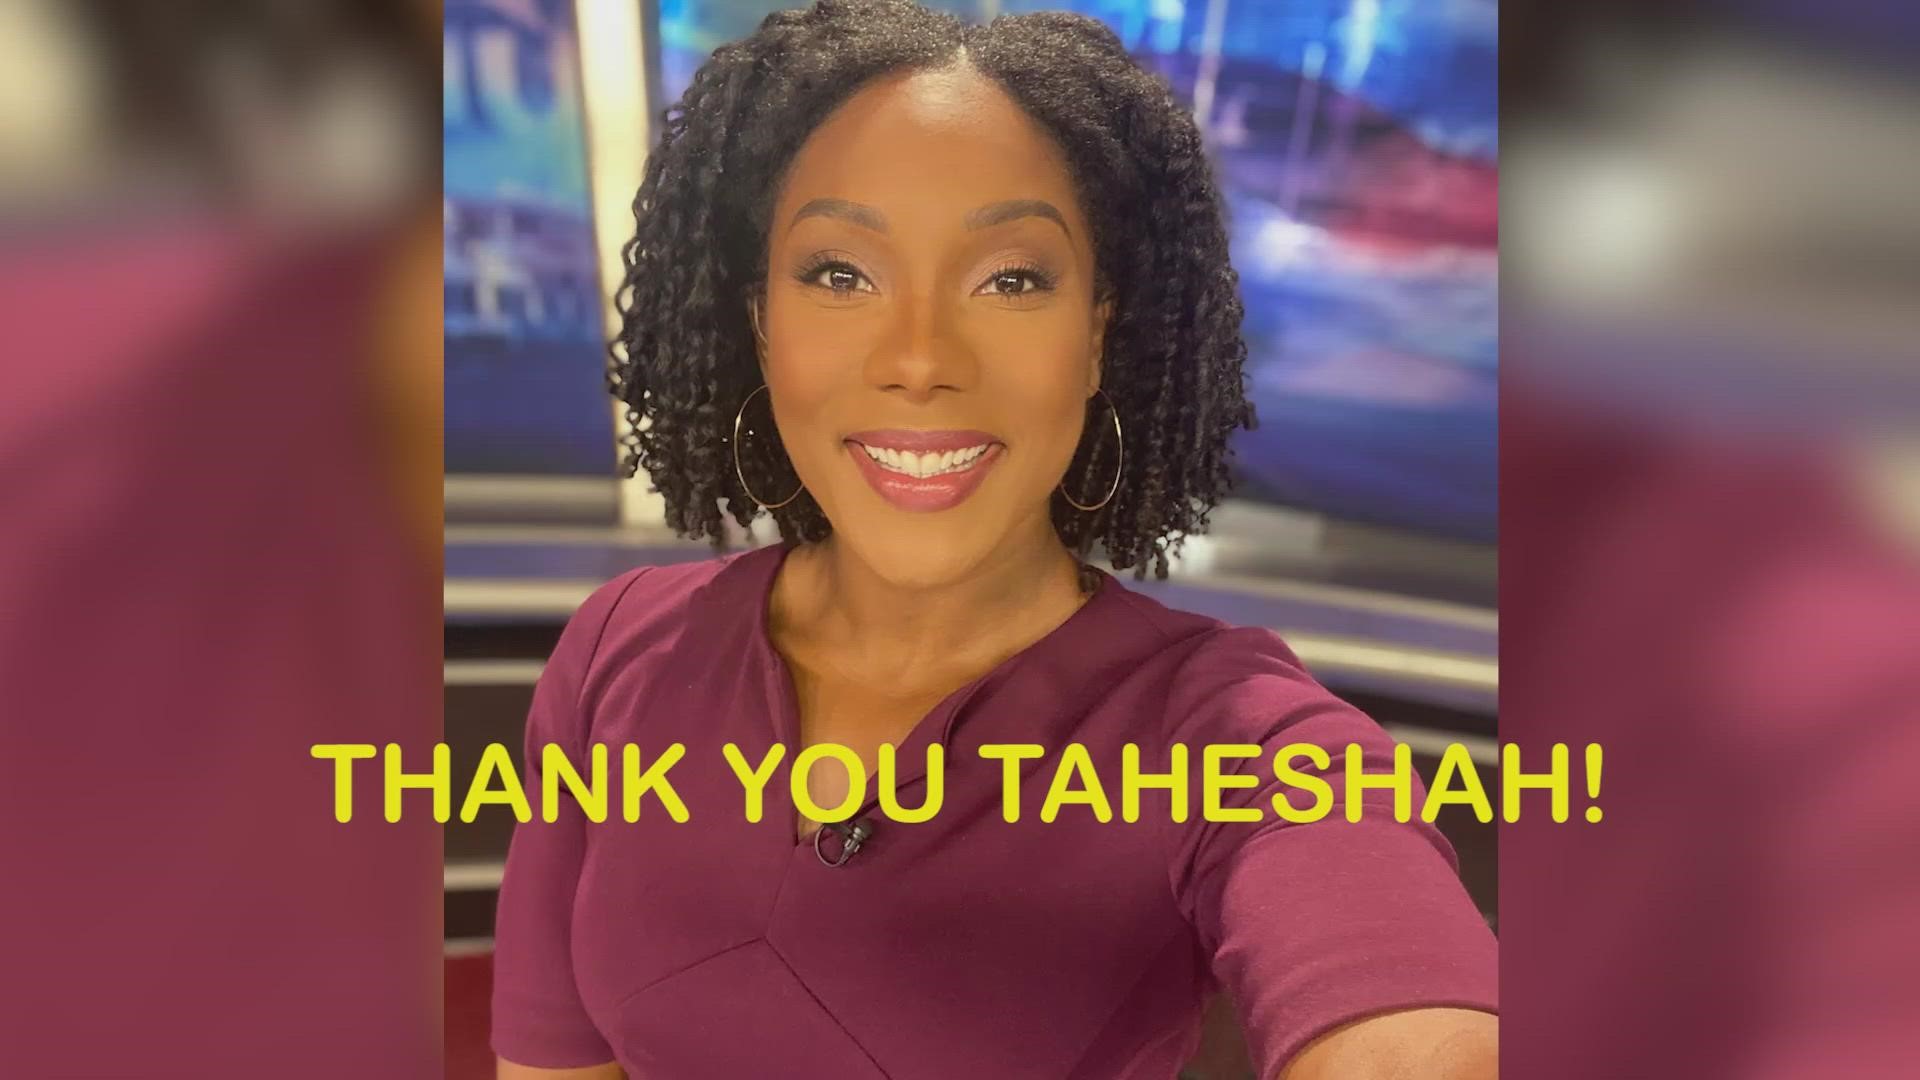 6 News gives Taheshah a bittersweet sendoff and wishes her the best of luck with her new opportunity!